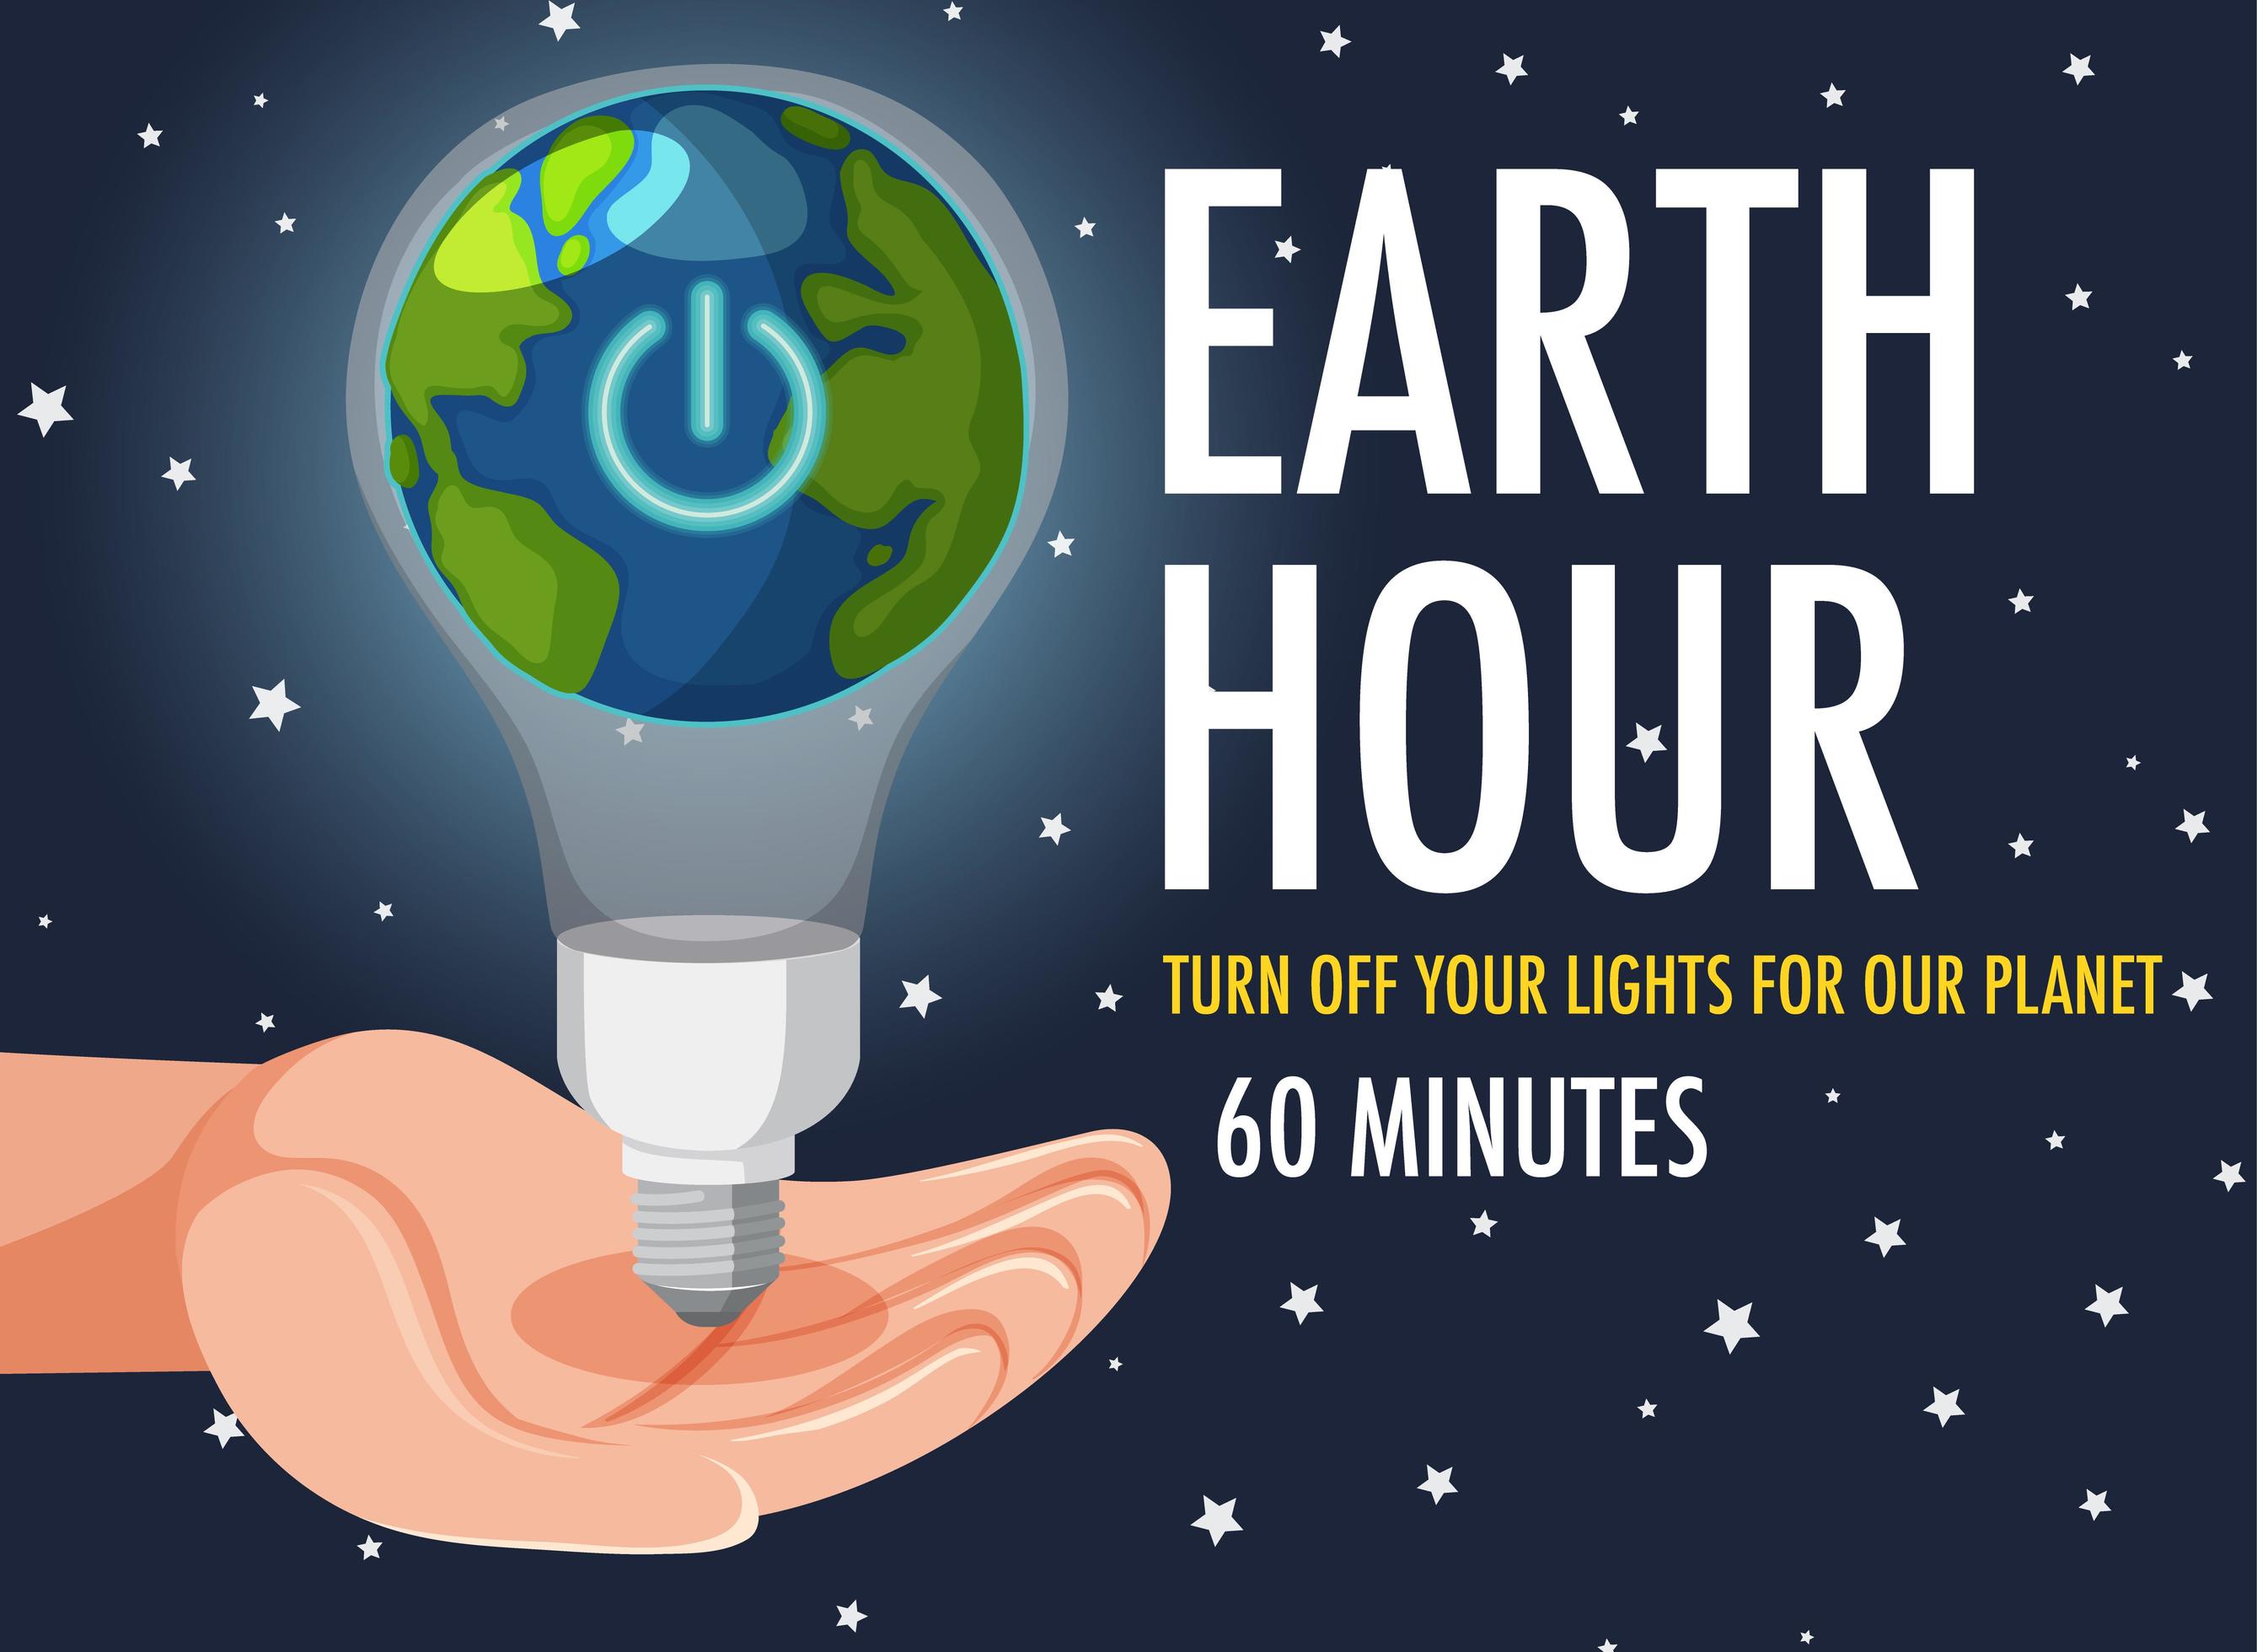 Earth Hour campaign poster or banner turn off your lights for our